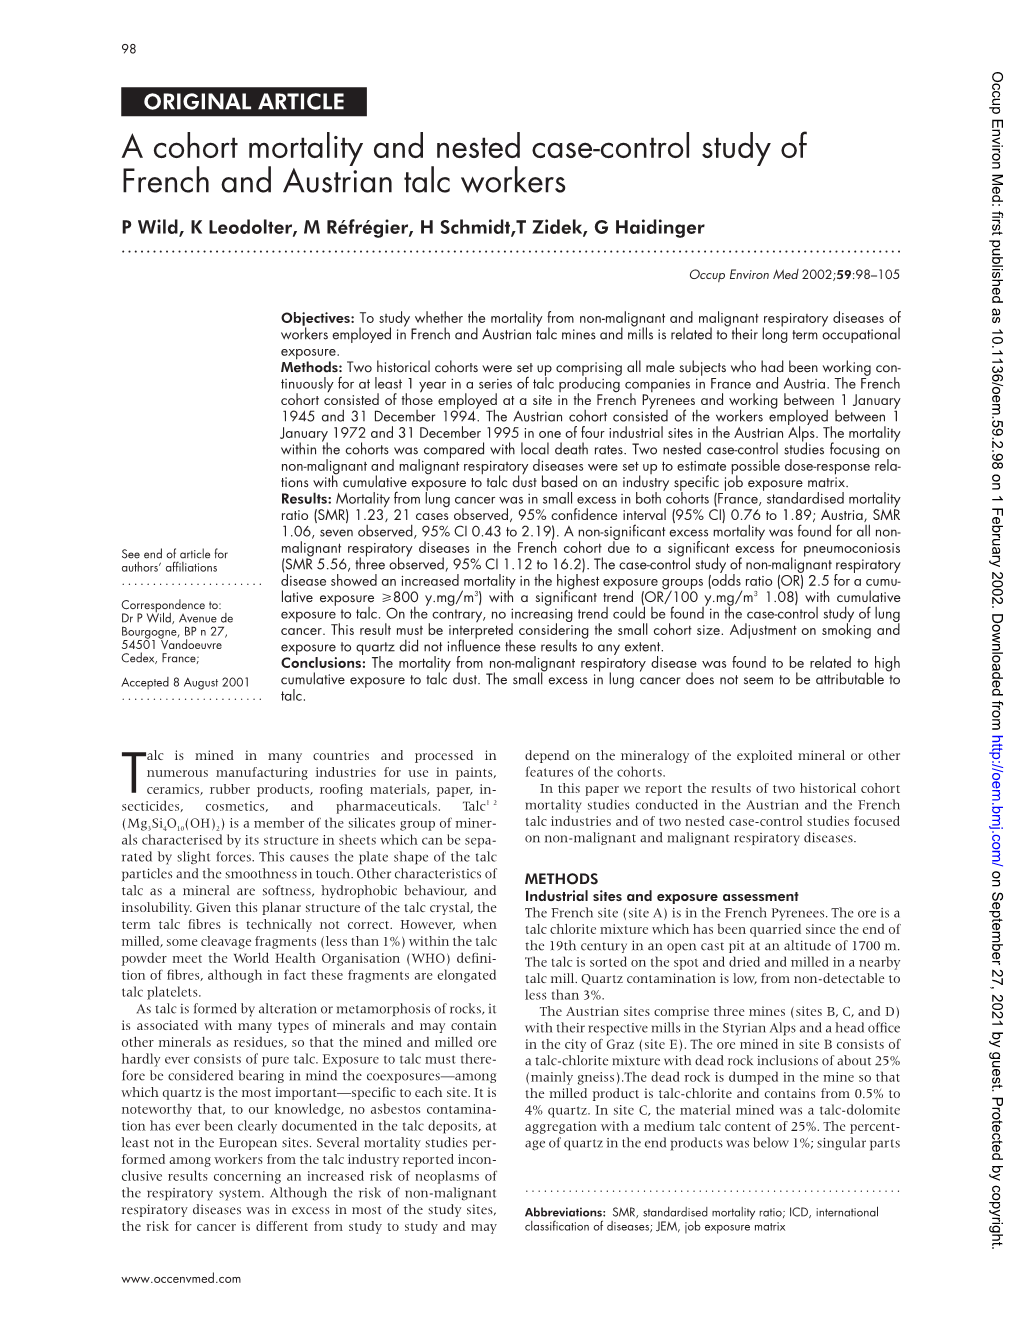 A Cohort Mortality and Nested Case-Control Study of French and Austrian Talc Workers P Wild, K Leodolter, M Réfrégier, H Schmidt,T Zidek, G Haidinger